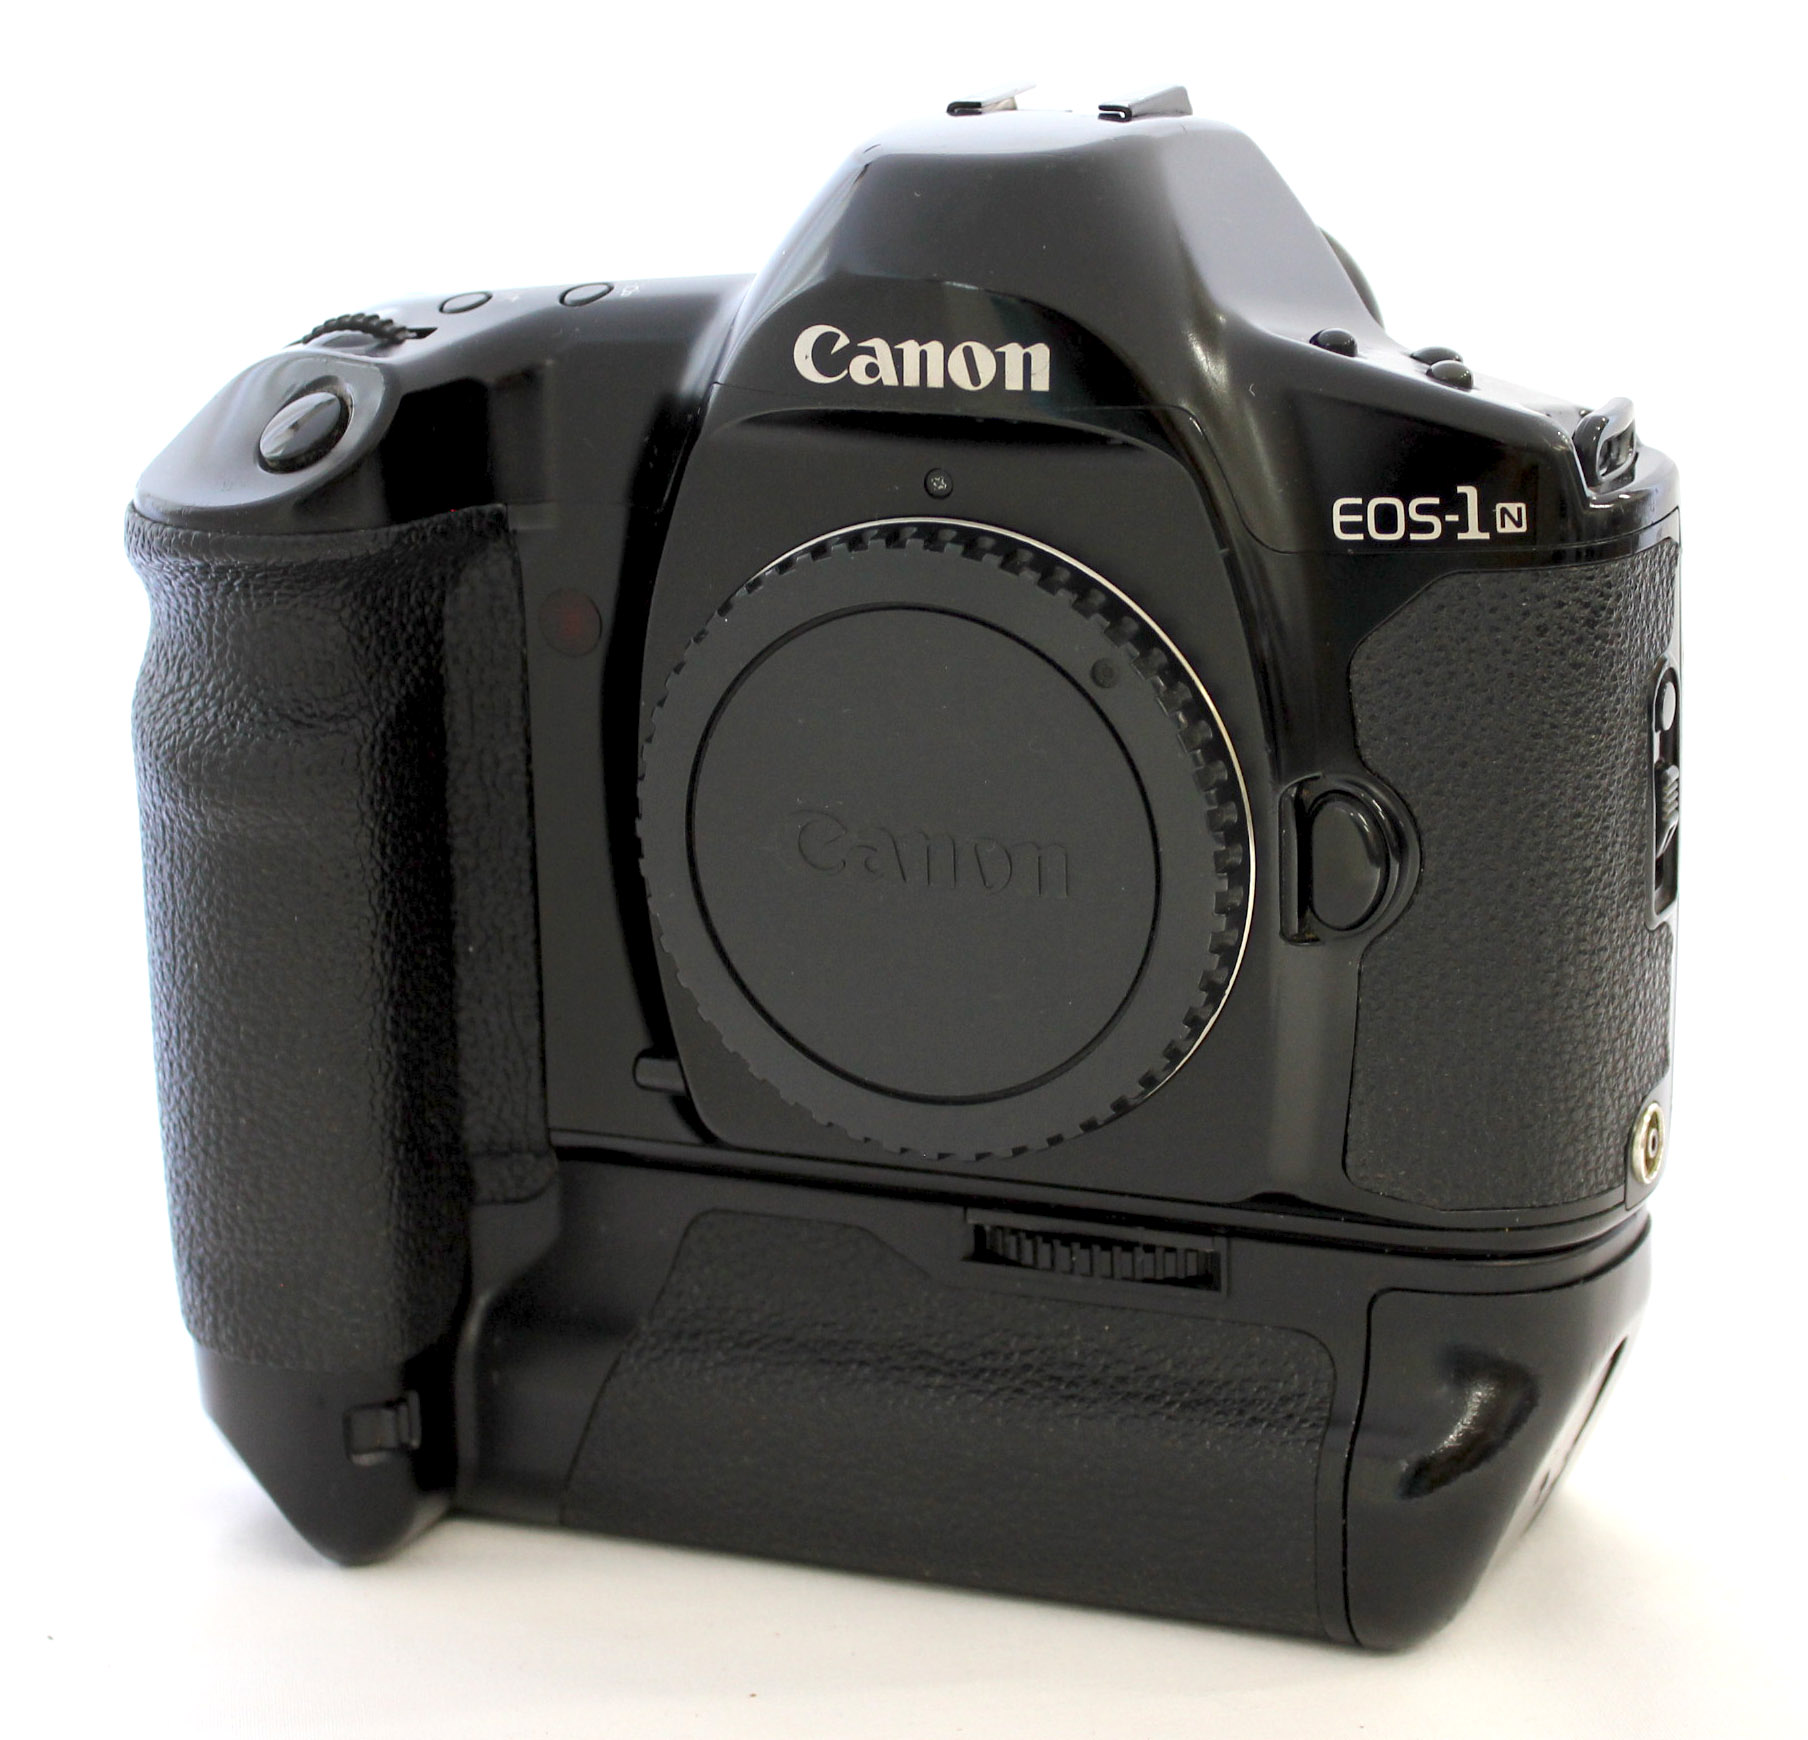 Japan Used Camera Shop | [Excellent+++++] Canon EOS-1N HS 35mm SLR Film Camera Body w/ Power Drive Booster E1 from Japan